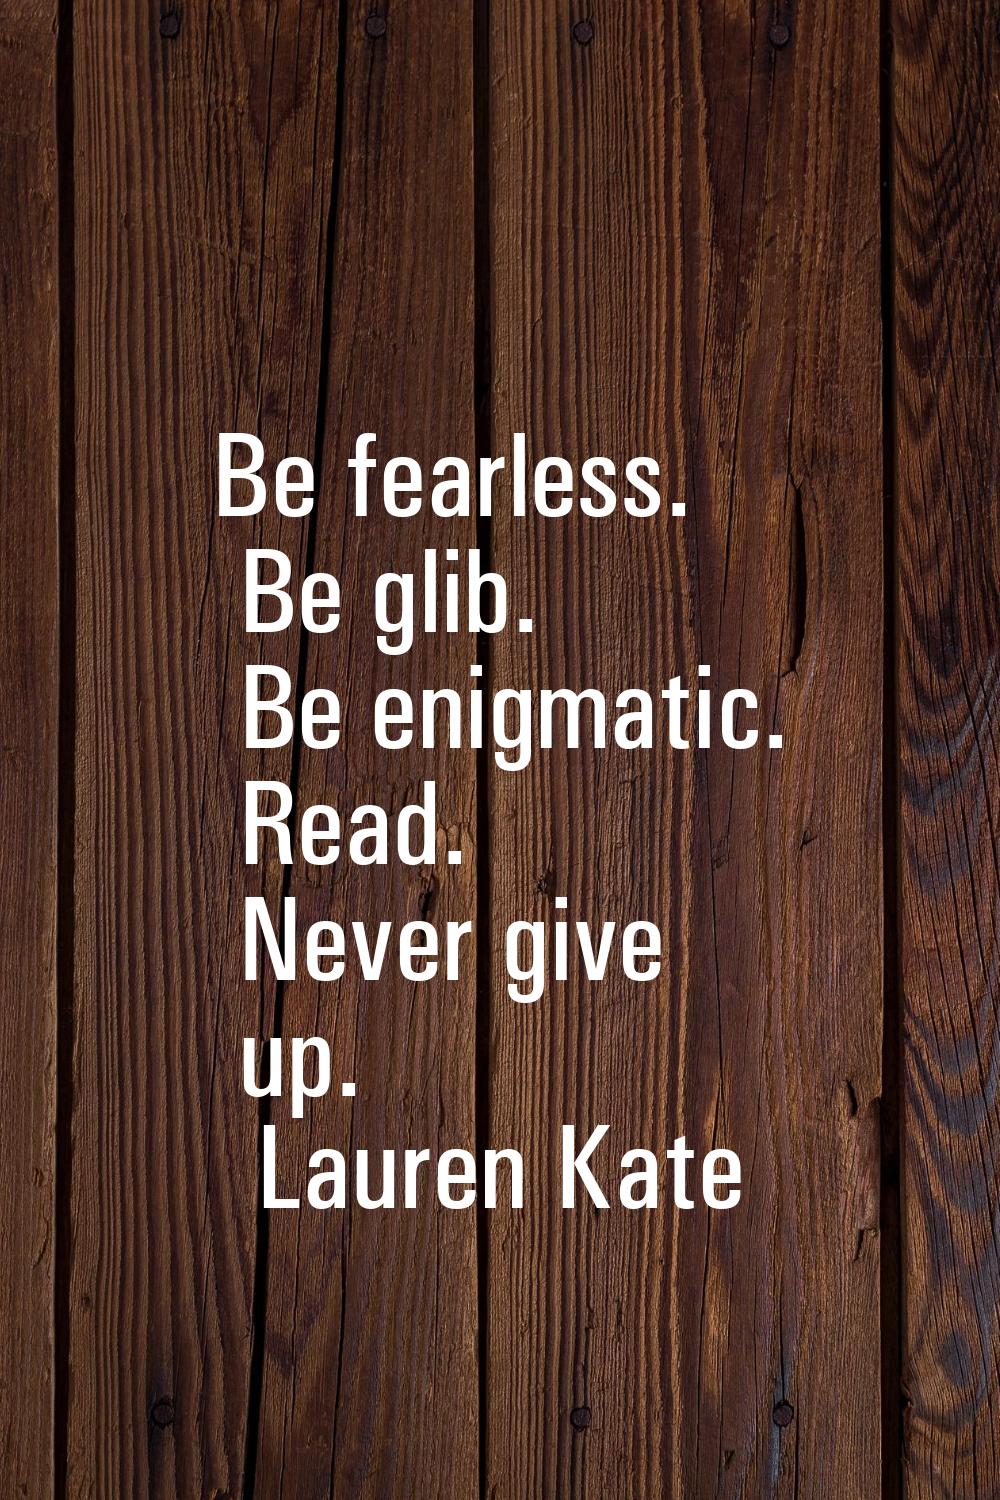 Be fearless. Be glib. Be enigmatic. Read. Never give up.